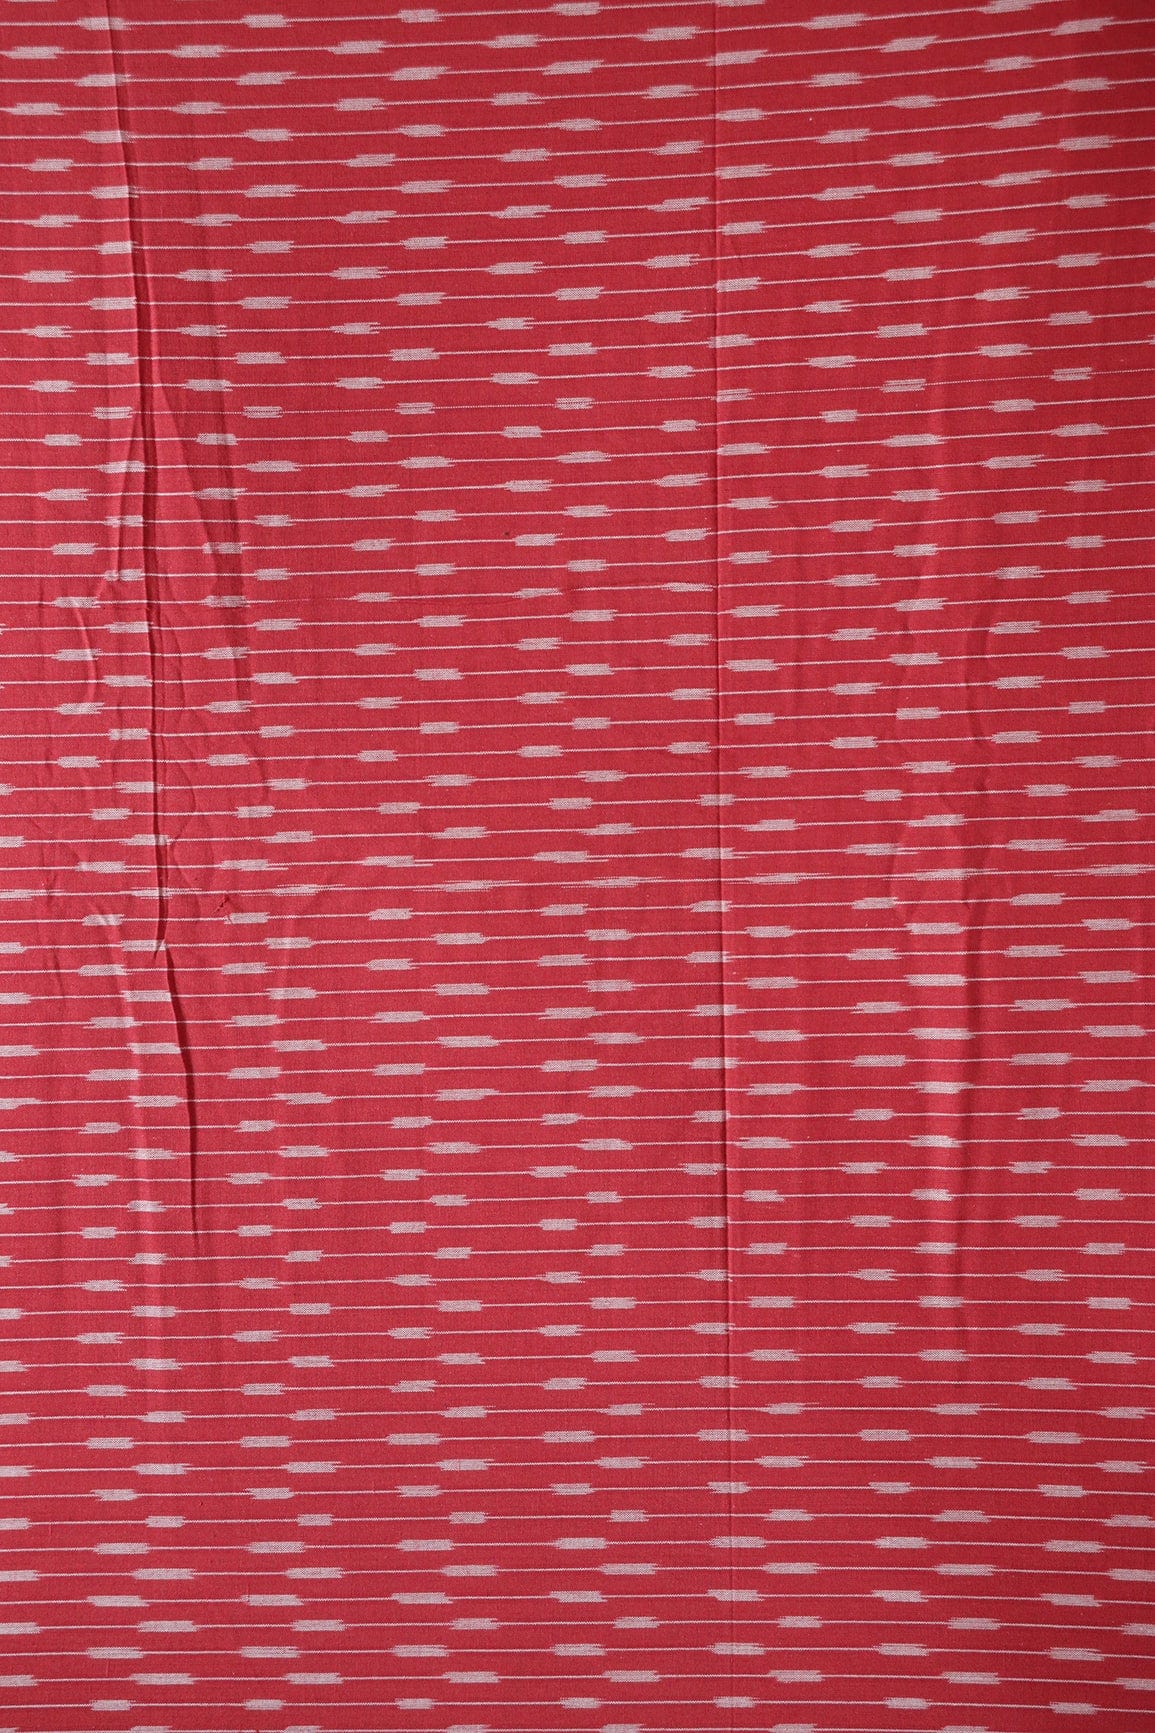 doeraa Hand Woven Red And White Stripes Pattern Handwoven Ikat Organic Cotton Fabric